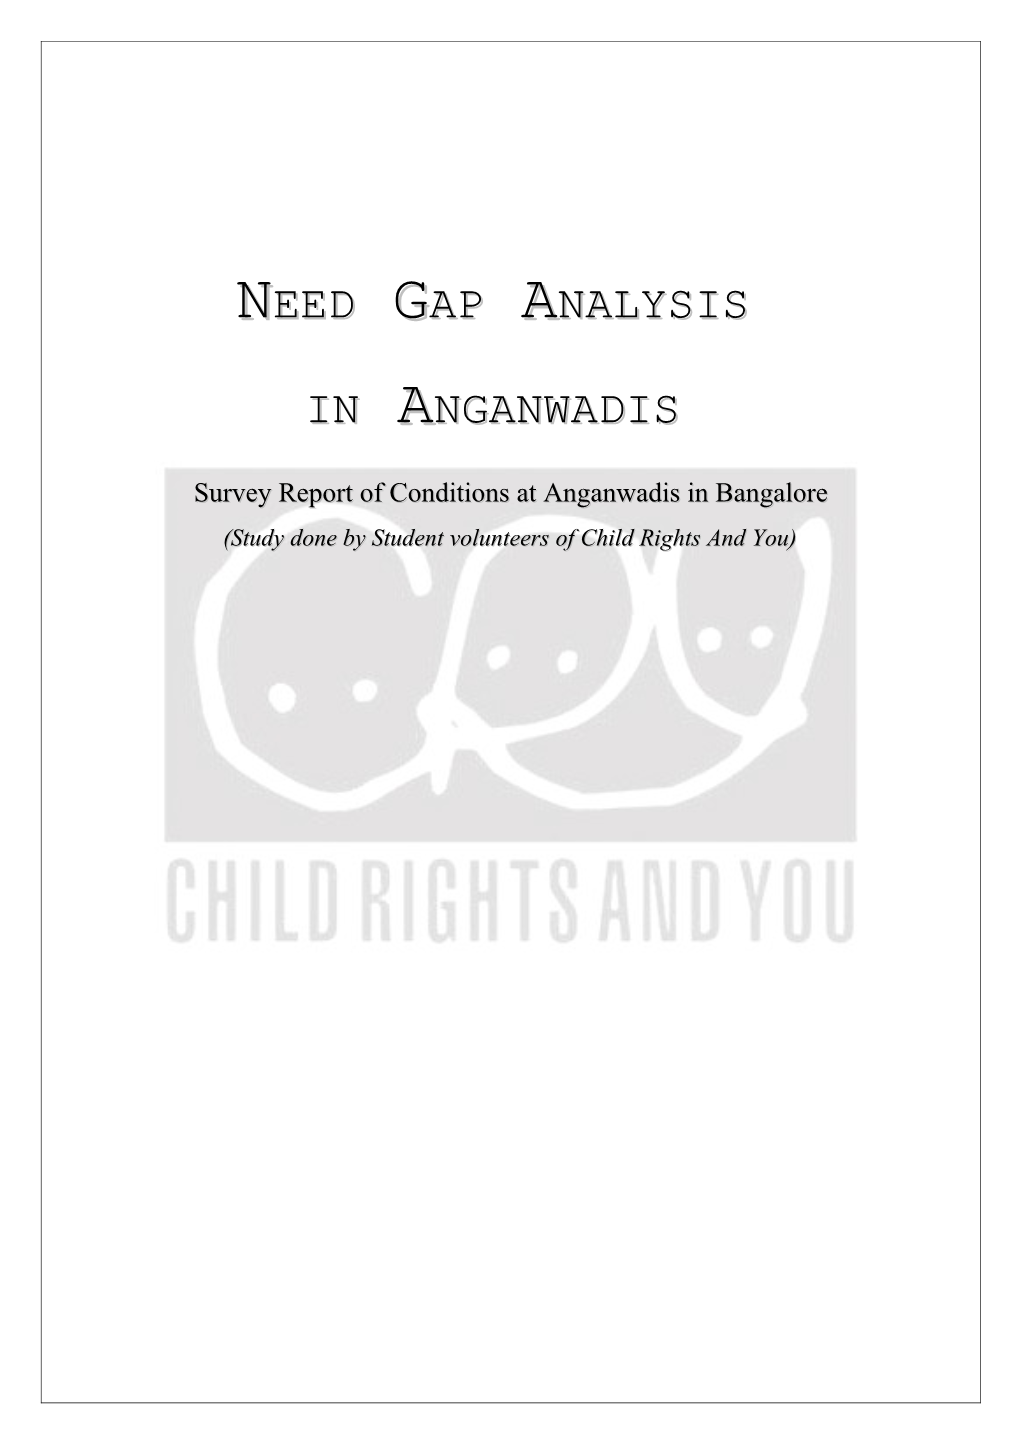 Survey Report of Conditions at Anganwadis in Bangalore